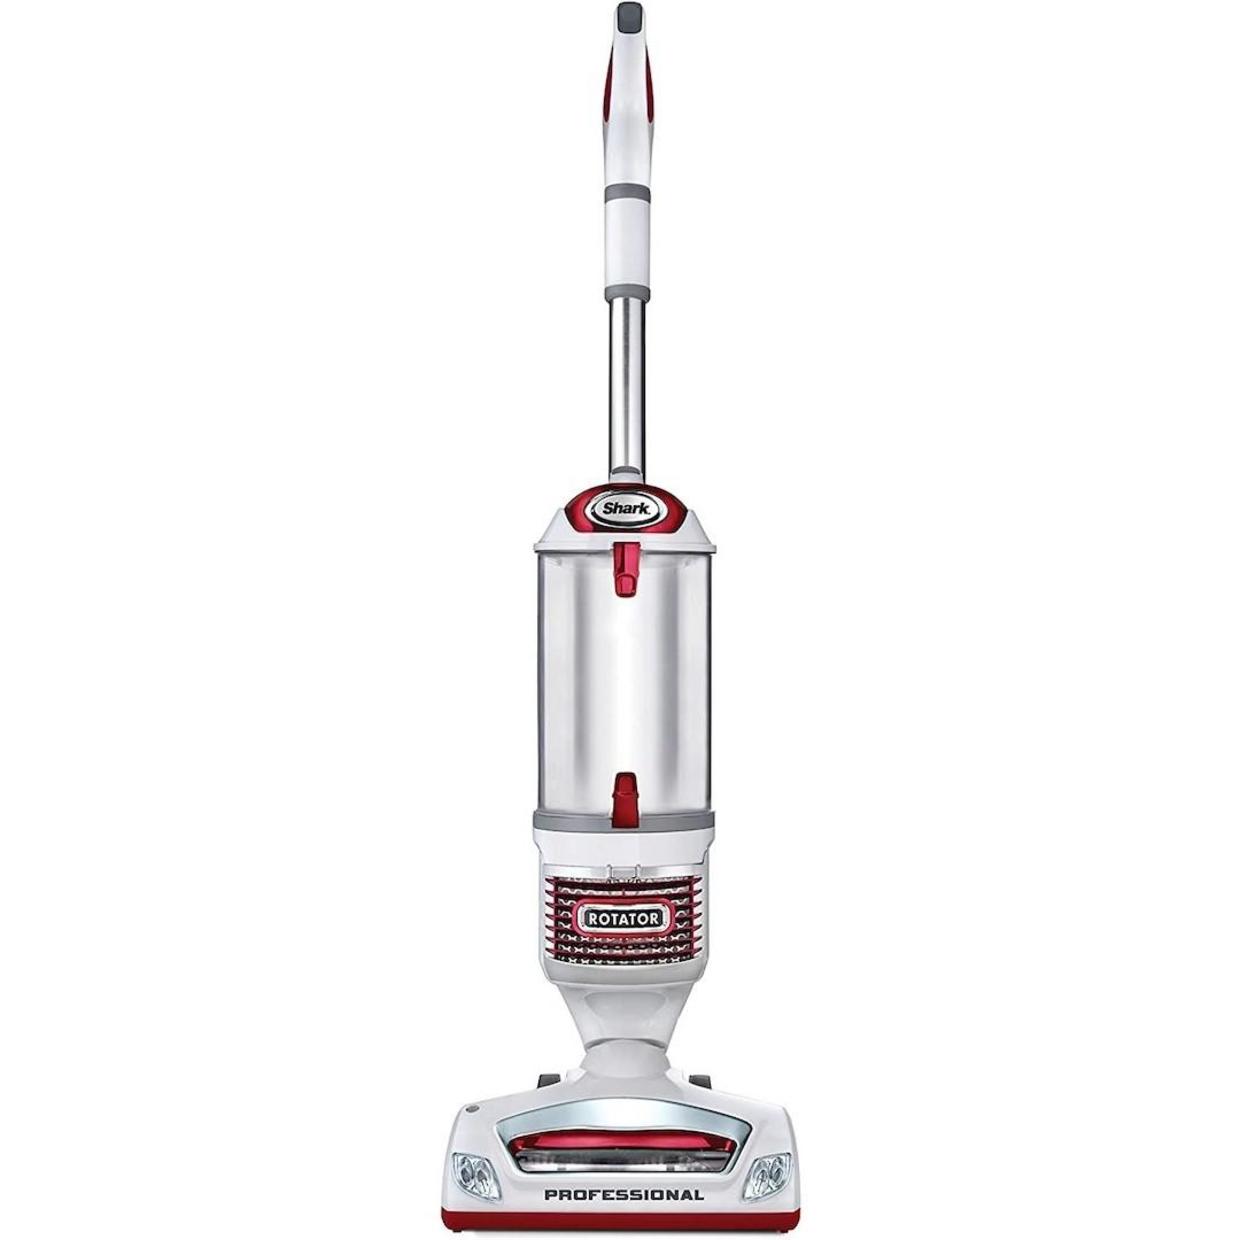 The best rated upright vacuums, stick vacuums, robot vacuums and mop